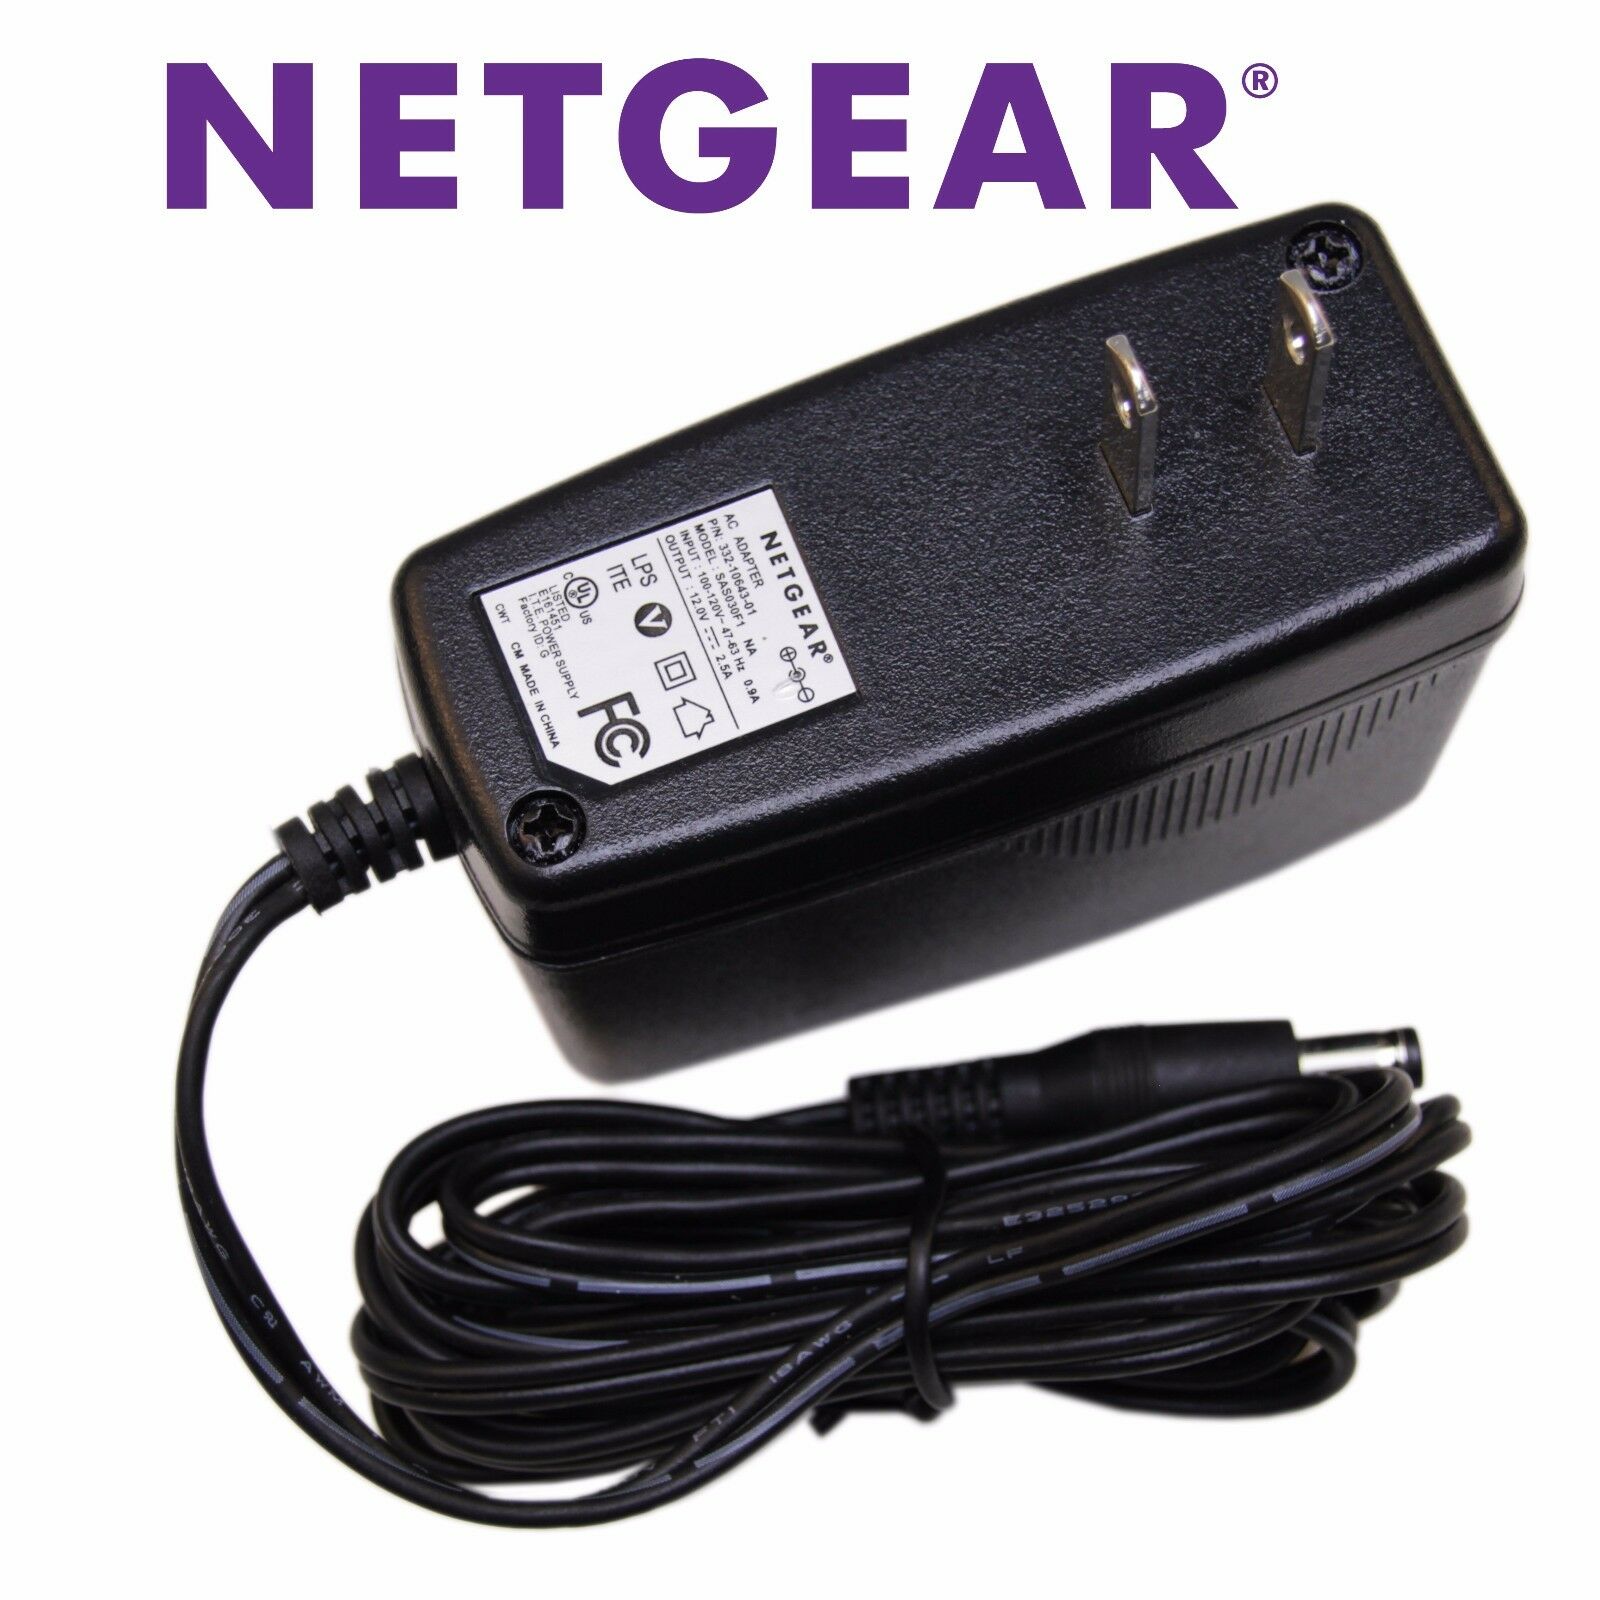 Genuine Netgear 12V AC Adapter Power Supply for Wireless Router Cable DSL Modem Output Voltage: 12V 2.5A P/N: 332-106